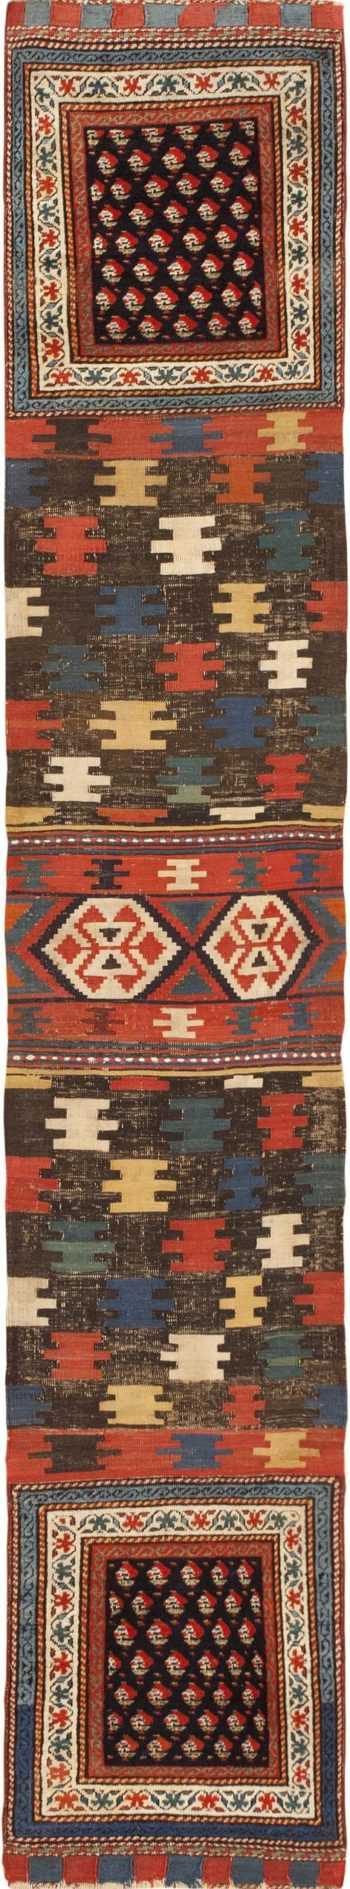 Antique Caucasian Shirvan Rug #44502 by Nazmiyal Antique Rugs